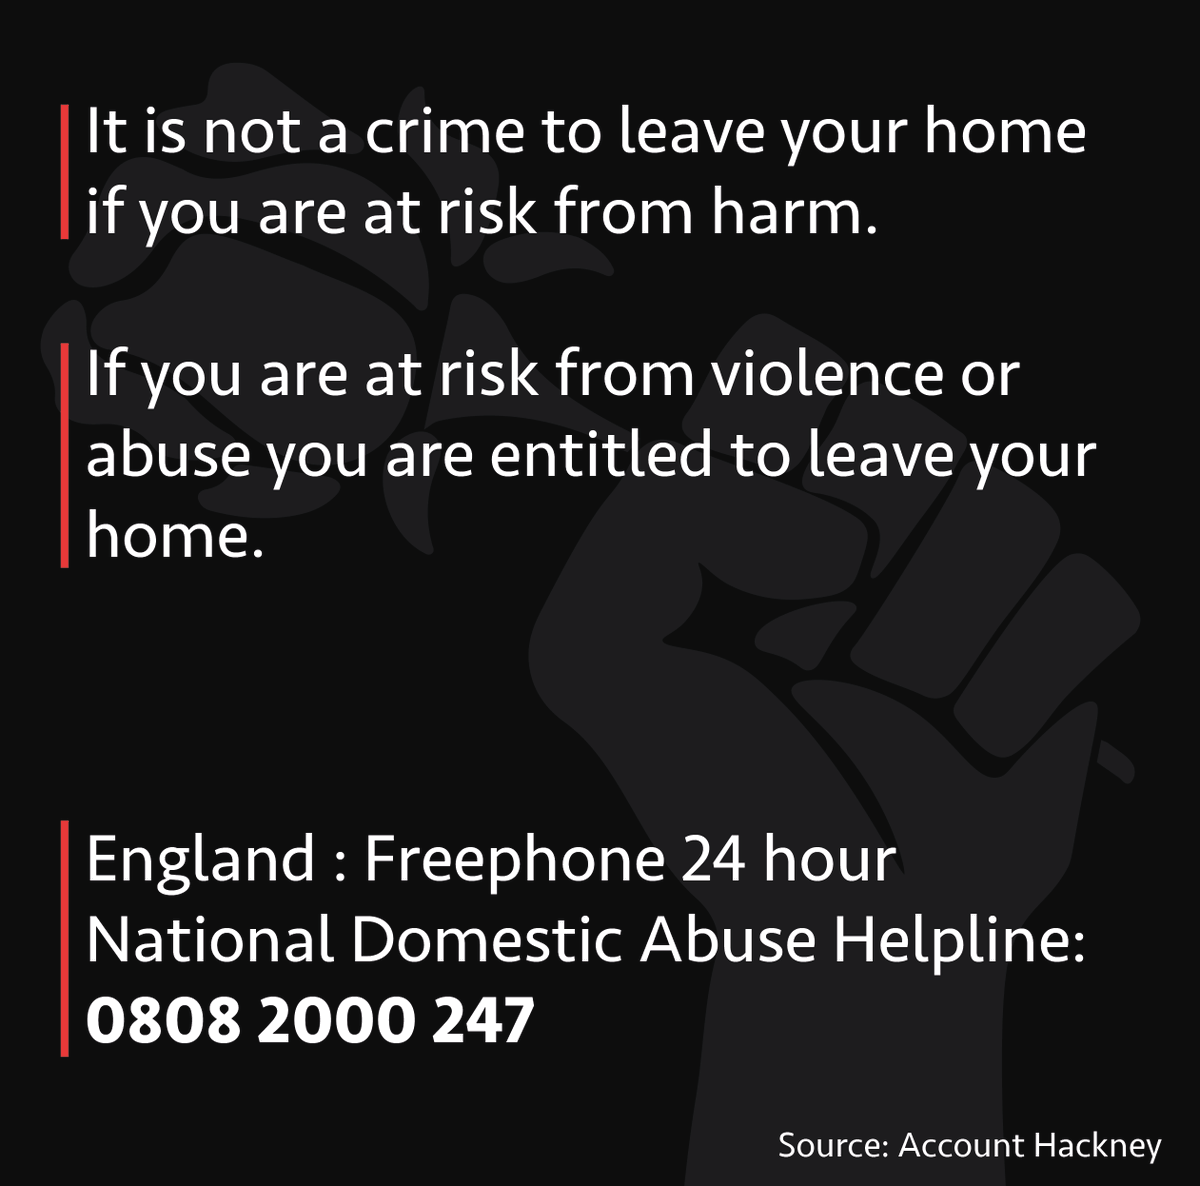 What if it is dangerous for me to stay at home?It is not a crime to leave your home if you are at risk from harm.England : Freephone 24 hour National Domestic Abuse Helpline:0808 2000 247